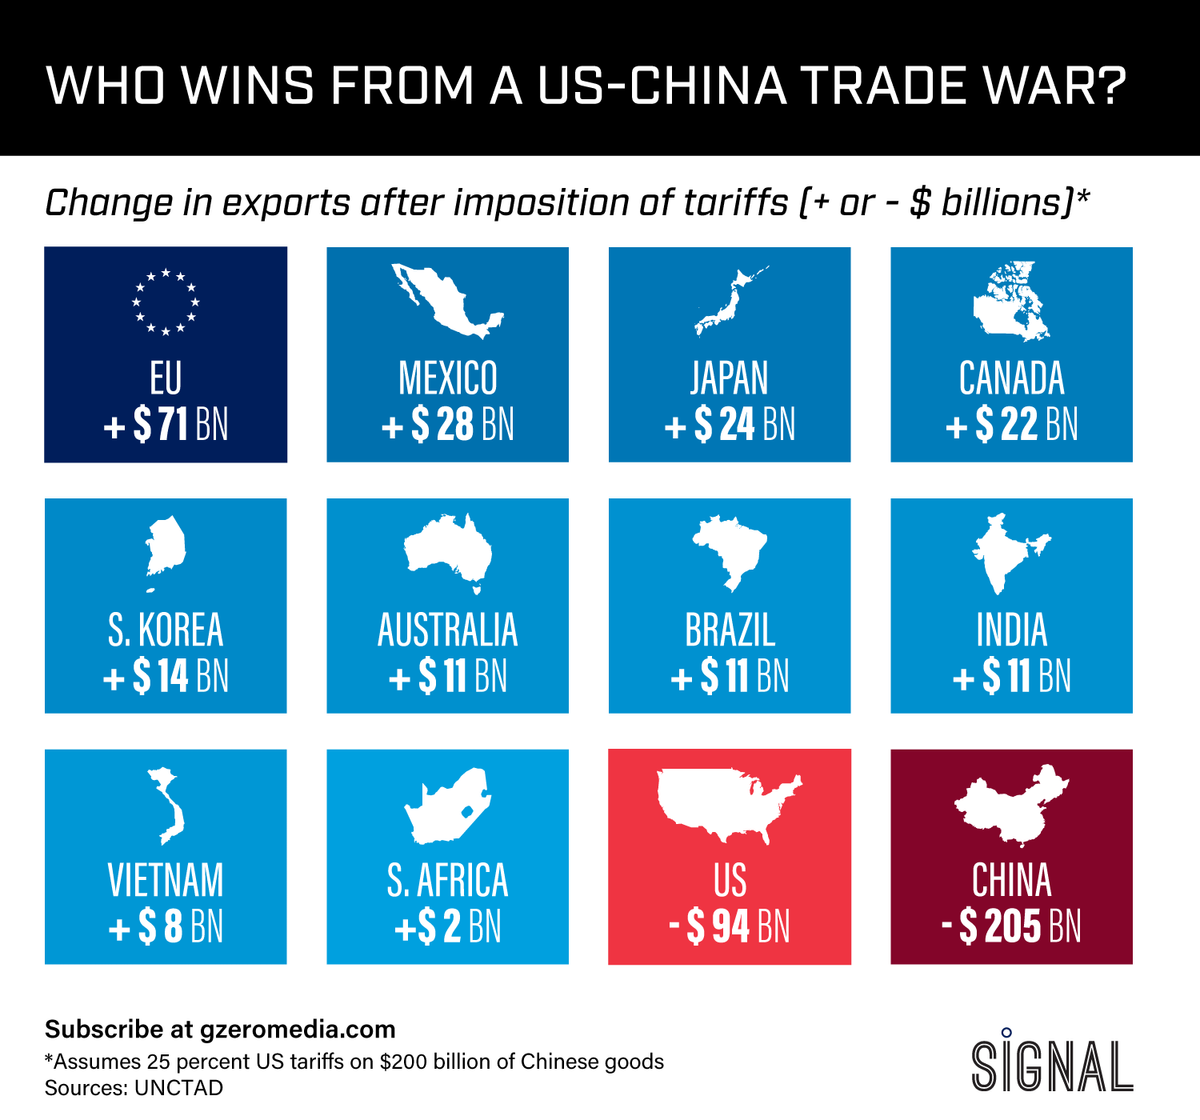 Graphic Truth: Who Wins From A US-China Trade War?